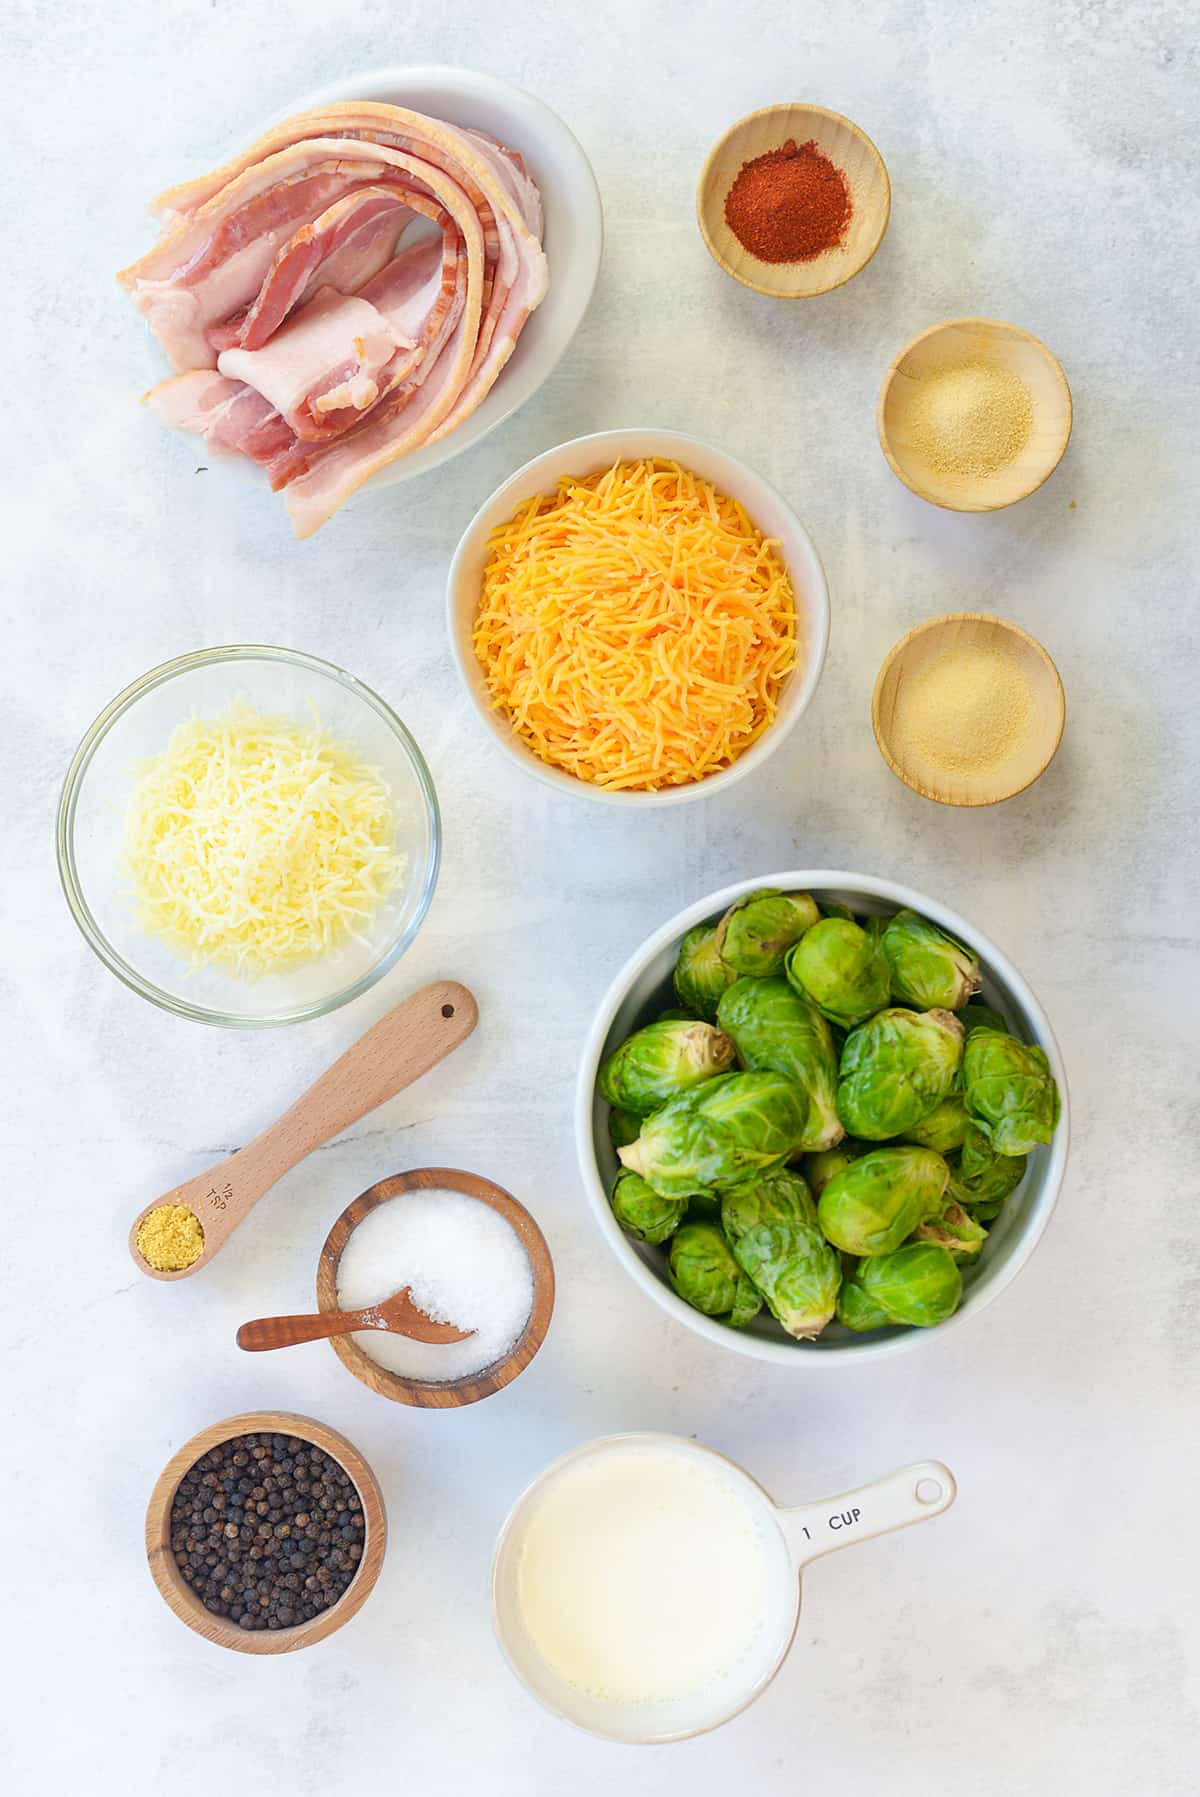 Ingredients for Brussels sprouts casserole.